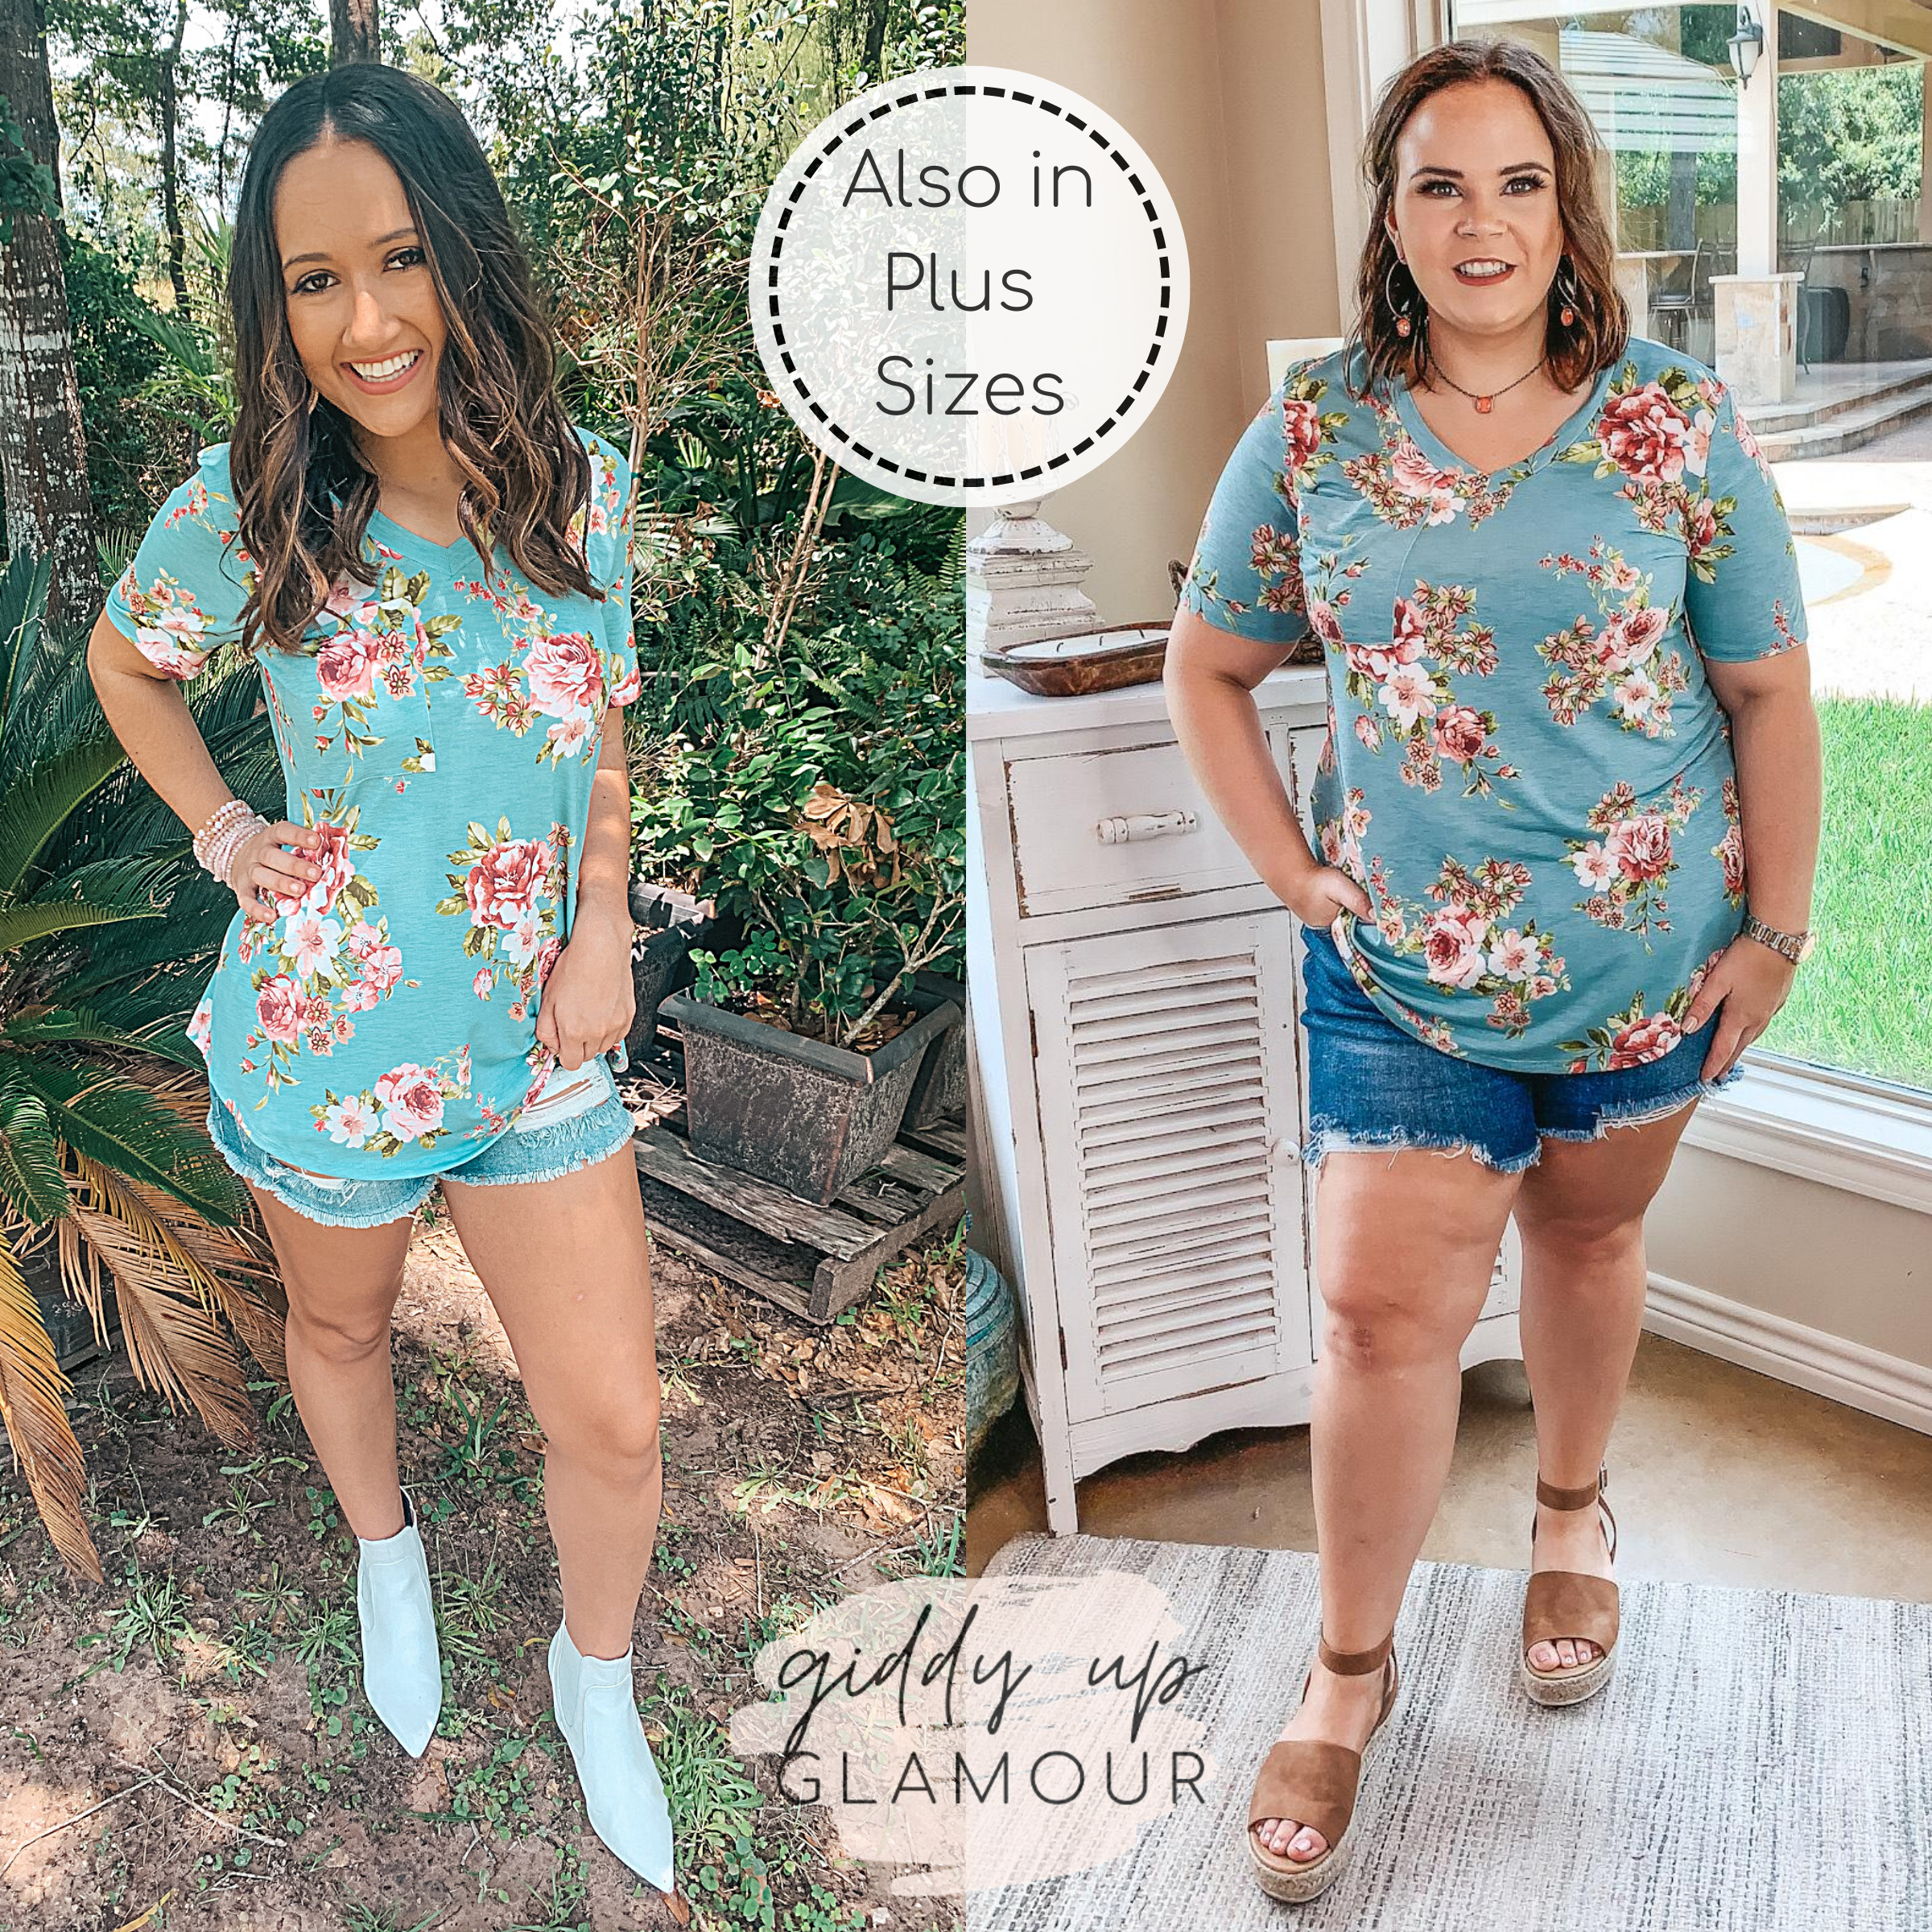 Last Chance Size Small & Medium | Just Right Short Sleeve Floral Print Pocket Tee in Dusty Teal Blue - Giddy Up Glamour Boutique